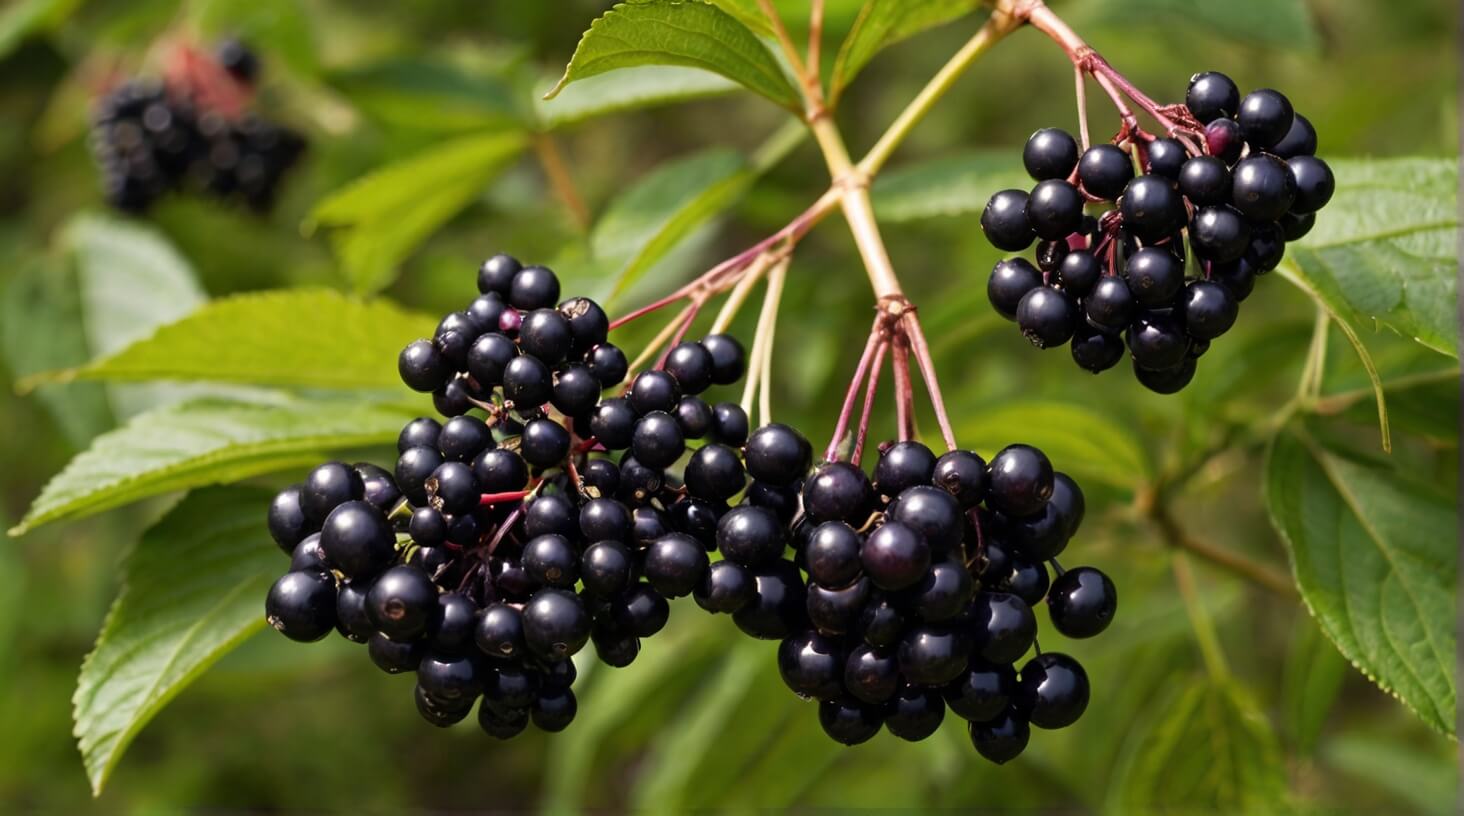 A bowl of fresh elderberries, highlighting the nutritional benefits and potential health advantages of elderberry consumption.